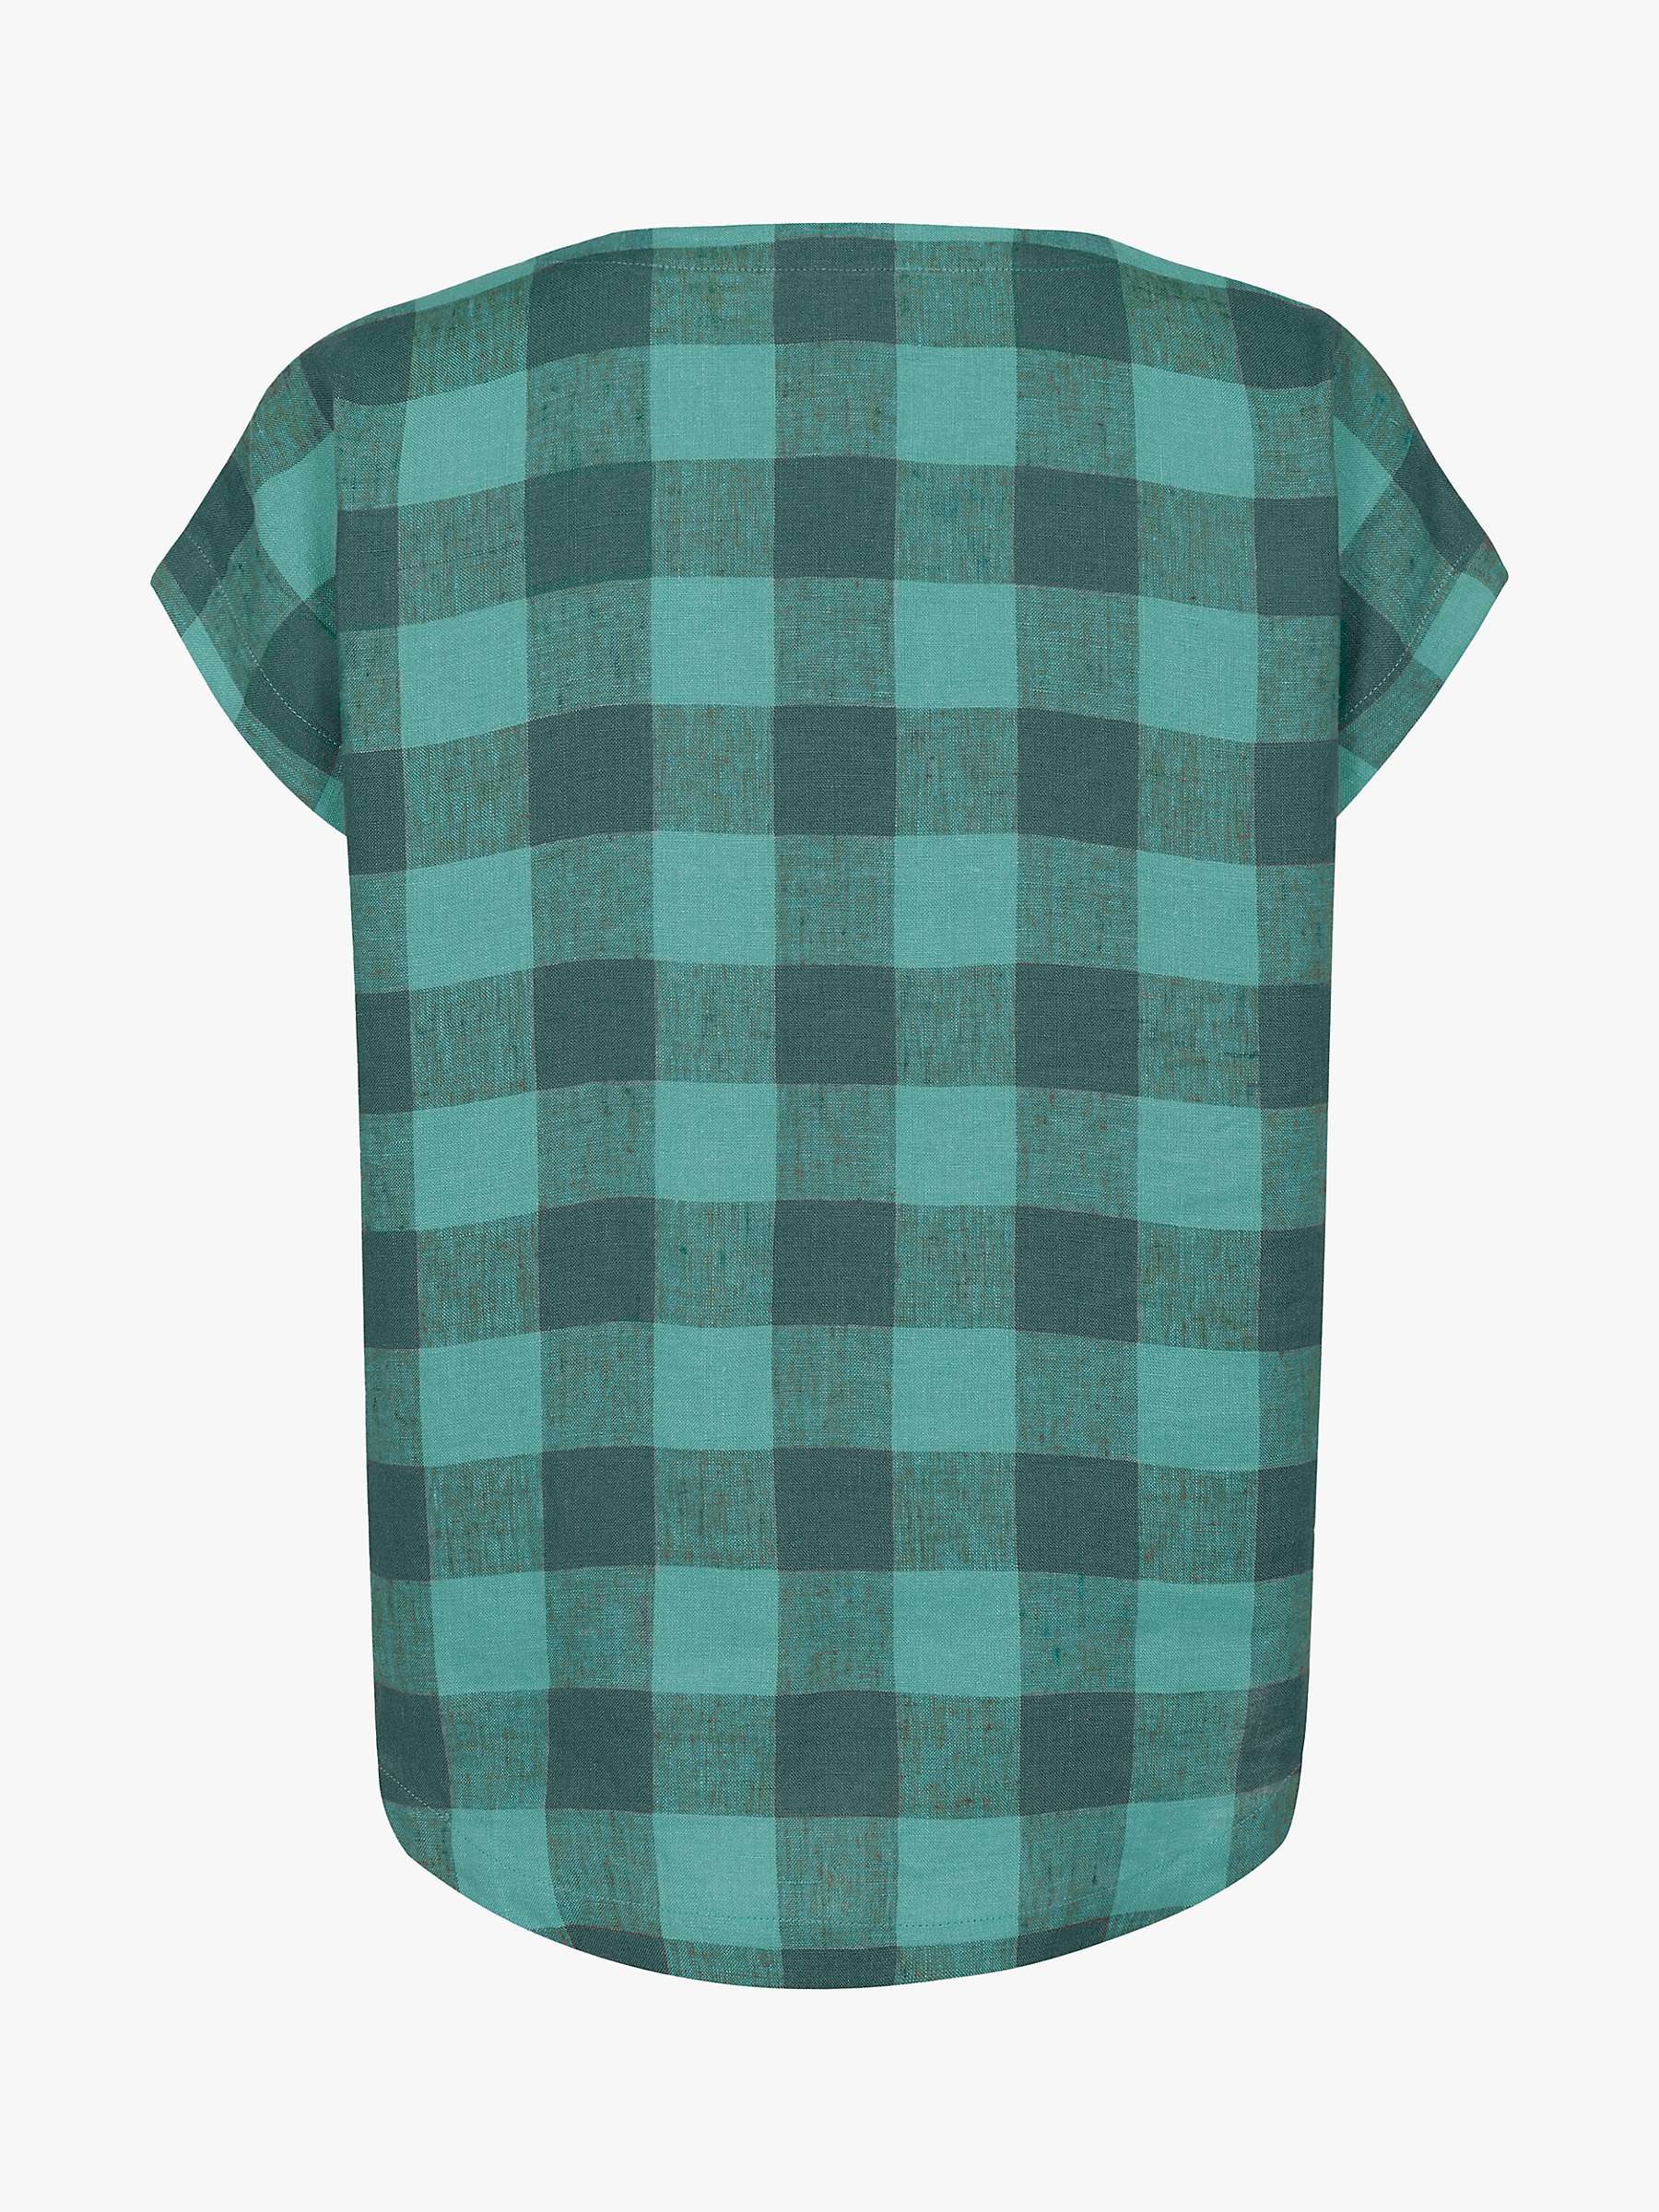 Buy Celtic & Co. Button Detail Linen Check Top, Sea Green Online at johnlewis.com